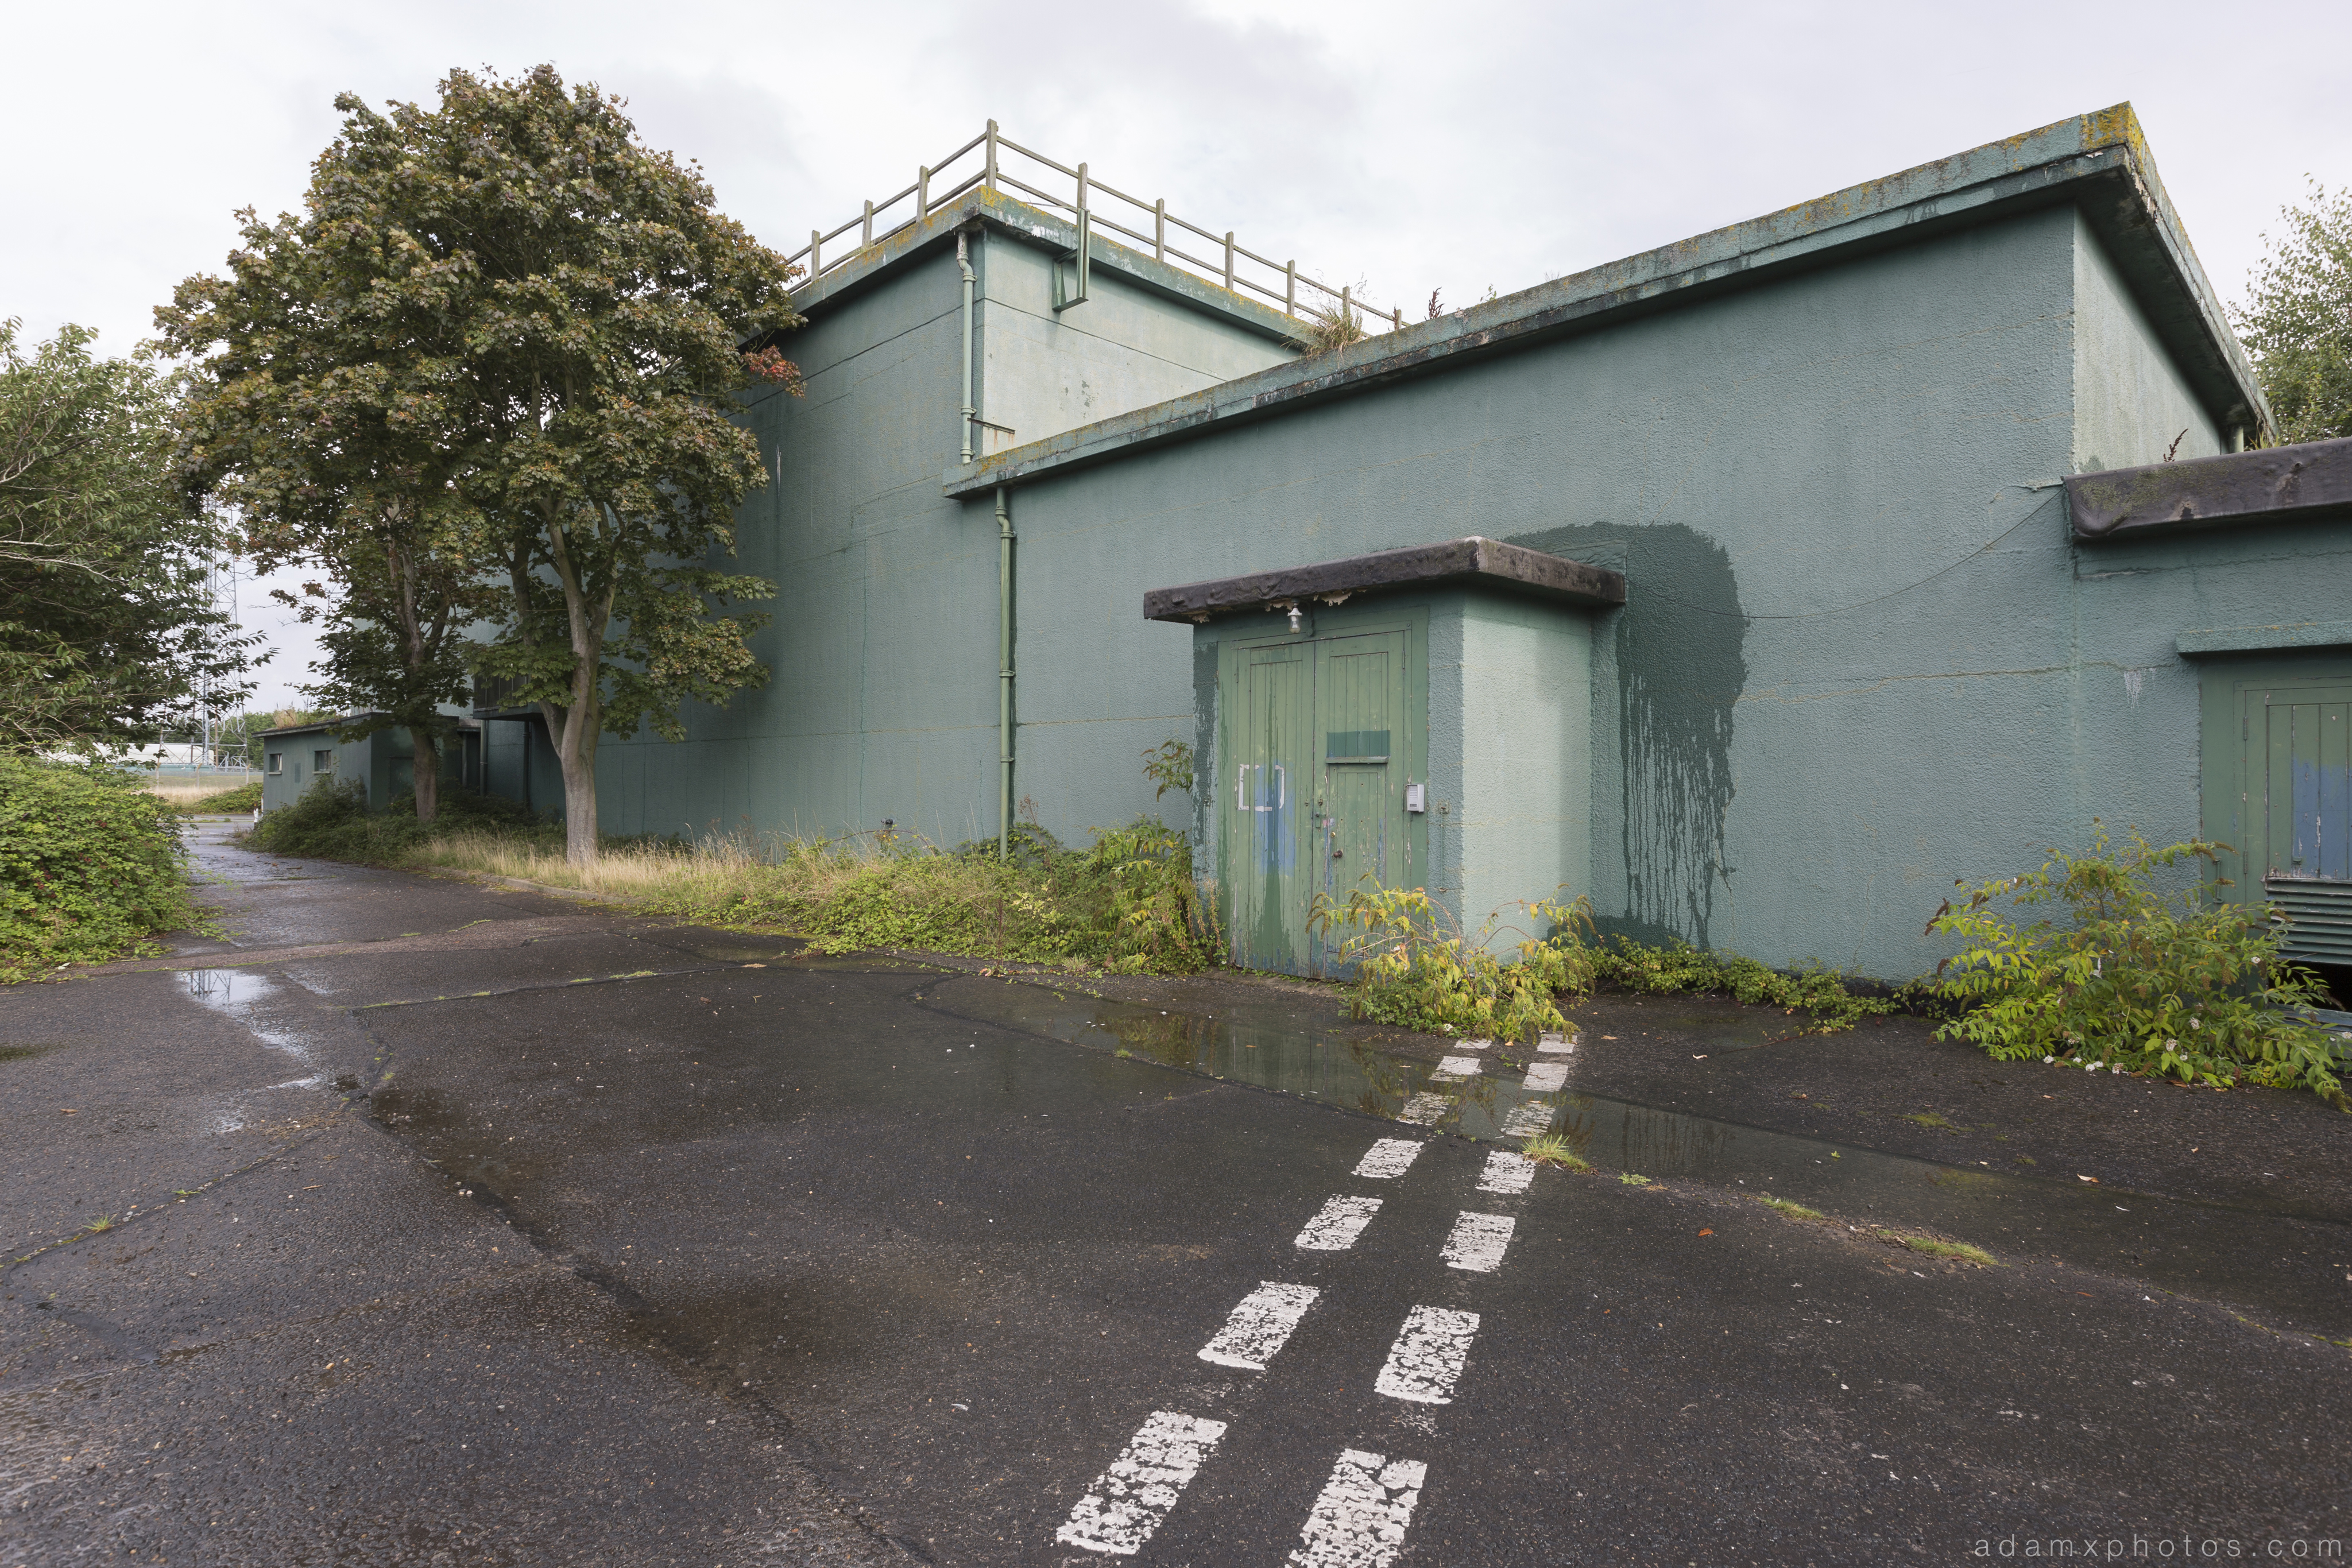 outside exterior RAF Neatished Norfolk R12 bunker Urbex Adam X Urban Exploration 2015 Abandoned decay lost forgotten derelict